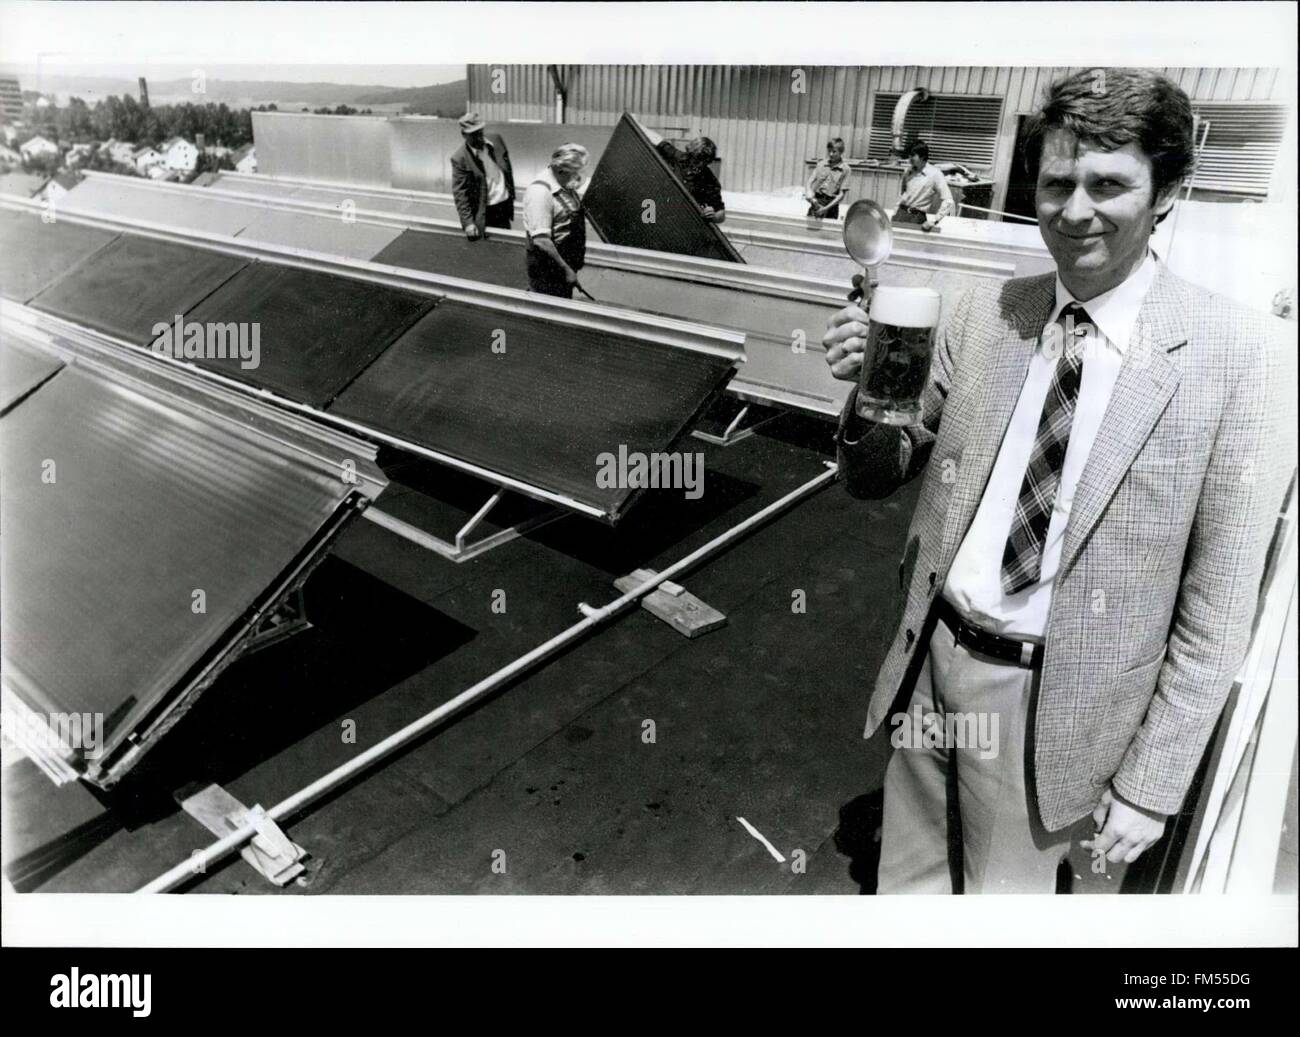 1978 - Solar-Energy to brew beer: The first great solar-installation in a West-german brewery: The brewers of West-Germany are conscious in energy. As the first enterprise in West-Germany, a brewery in Neimarkt/Upper Palatinate had built in a solar-installation. The futuristical pilots-project is supposed by the Bavarian Ministry of Economical and Traffic: As a beginning of use of solar-energy not only in breweries, but in the whole sphere of economy. The 64 square-meters hybrid-collectors producers hot air fro the malt-preparing or hot water for moisten the barley, the bottle-and barrel-washi Stock Photo